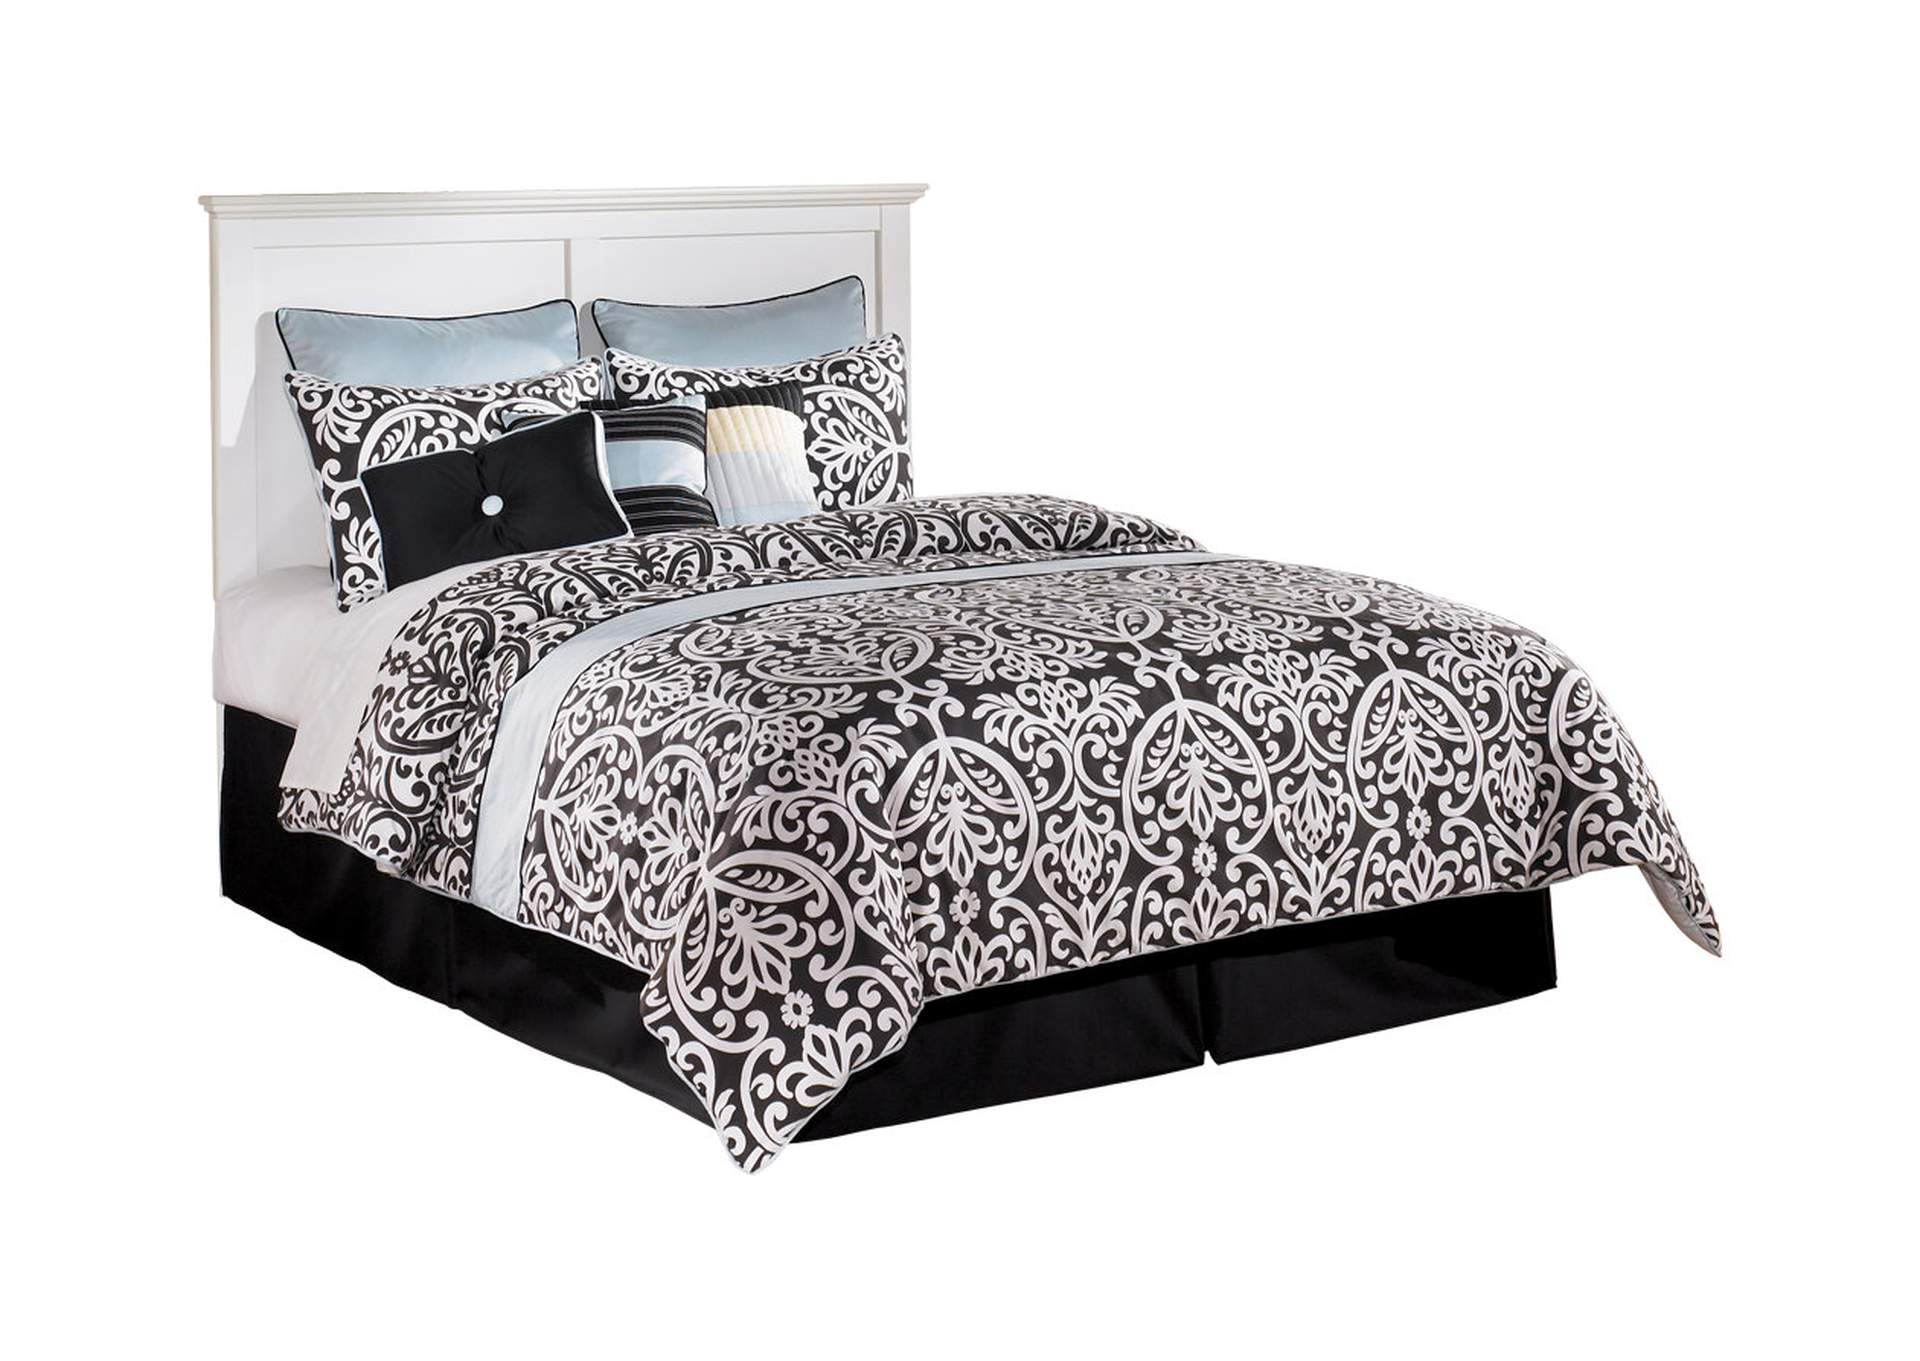 Bostwick Shoals Queen/Full Panel Headboard with Dresser,Signature Design By Ashley